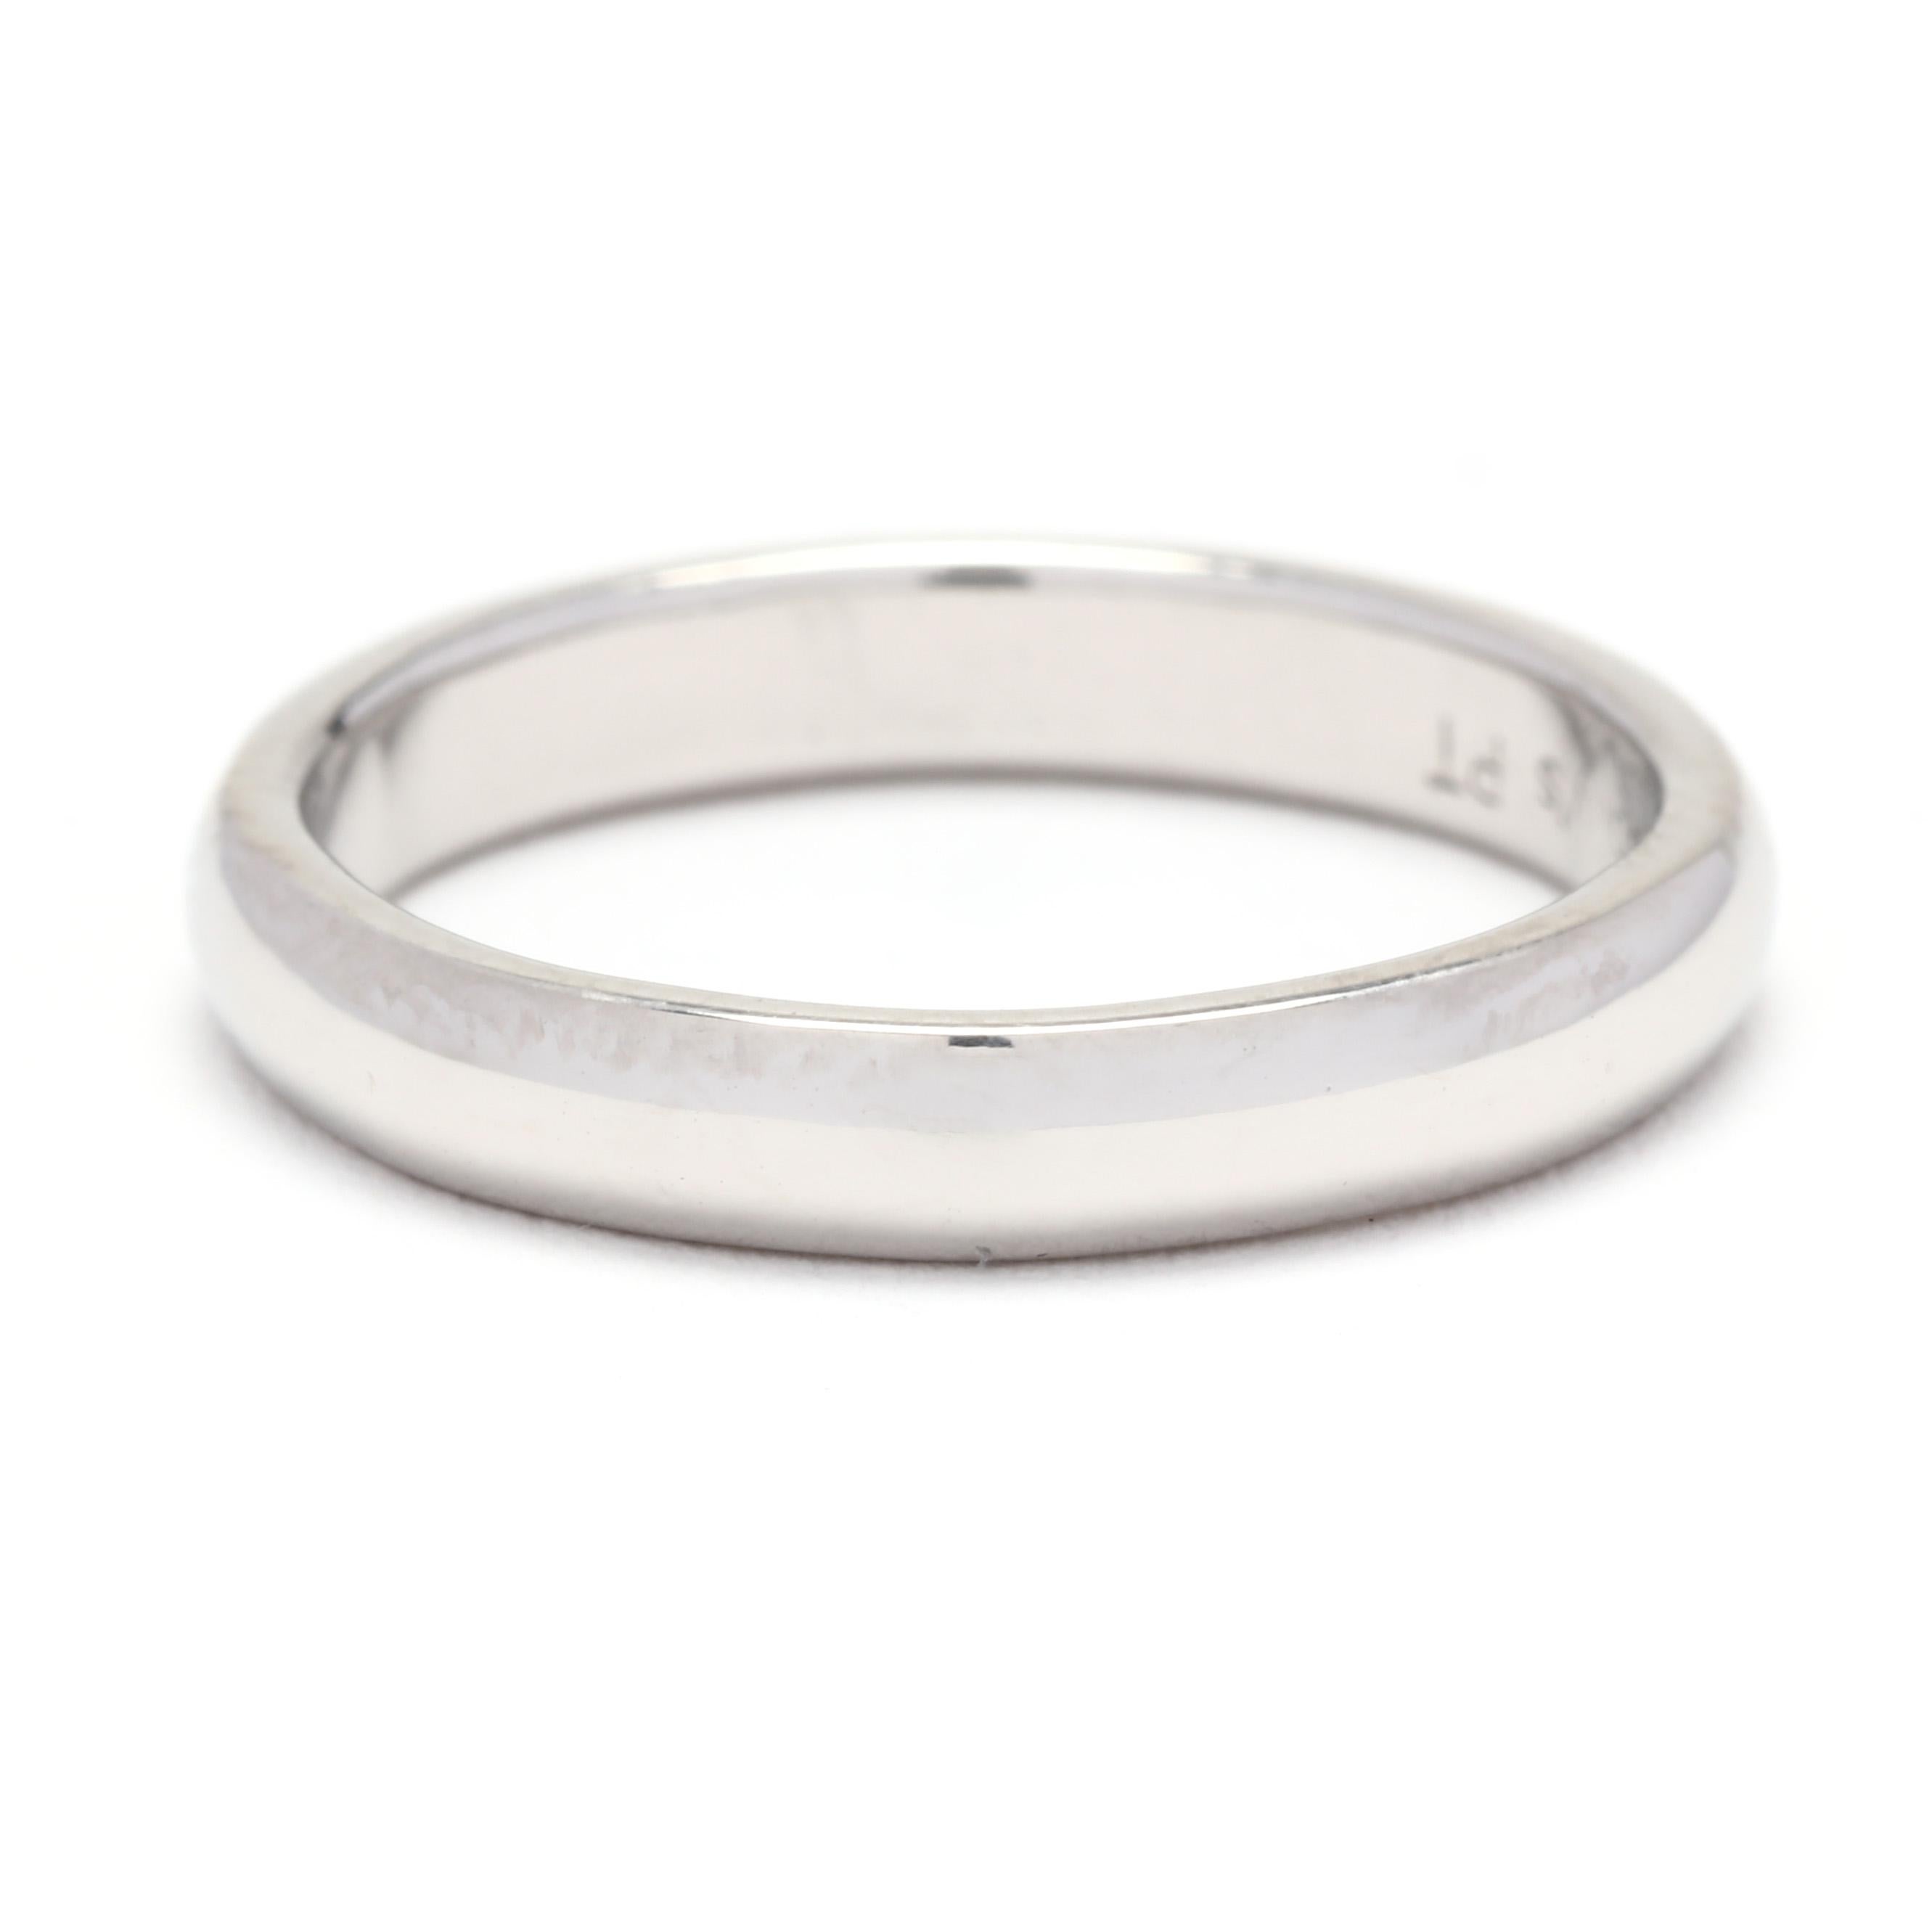 This classic and timeless 3mm Plain Wedding Band exudes elegance and sophistication. Crafted in platinum, this wide band is perfect for stacking and is a size 5.25. An understated, simple design, this plain platinum band is sure to be a treasured